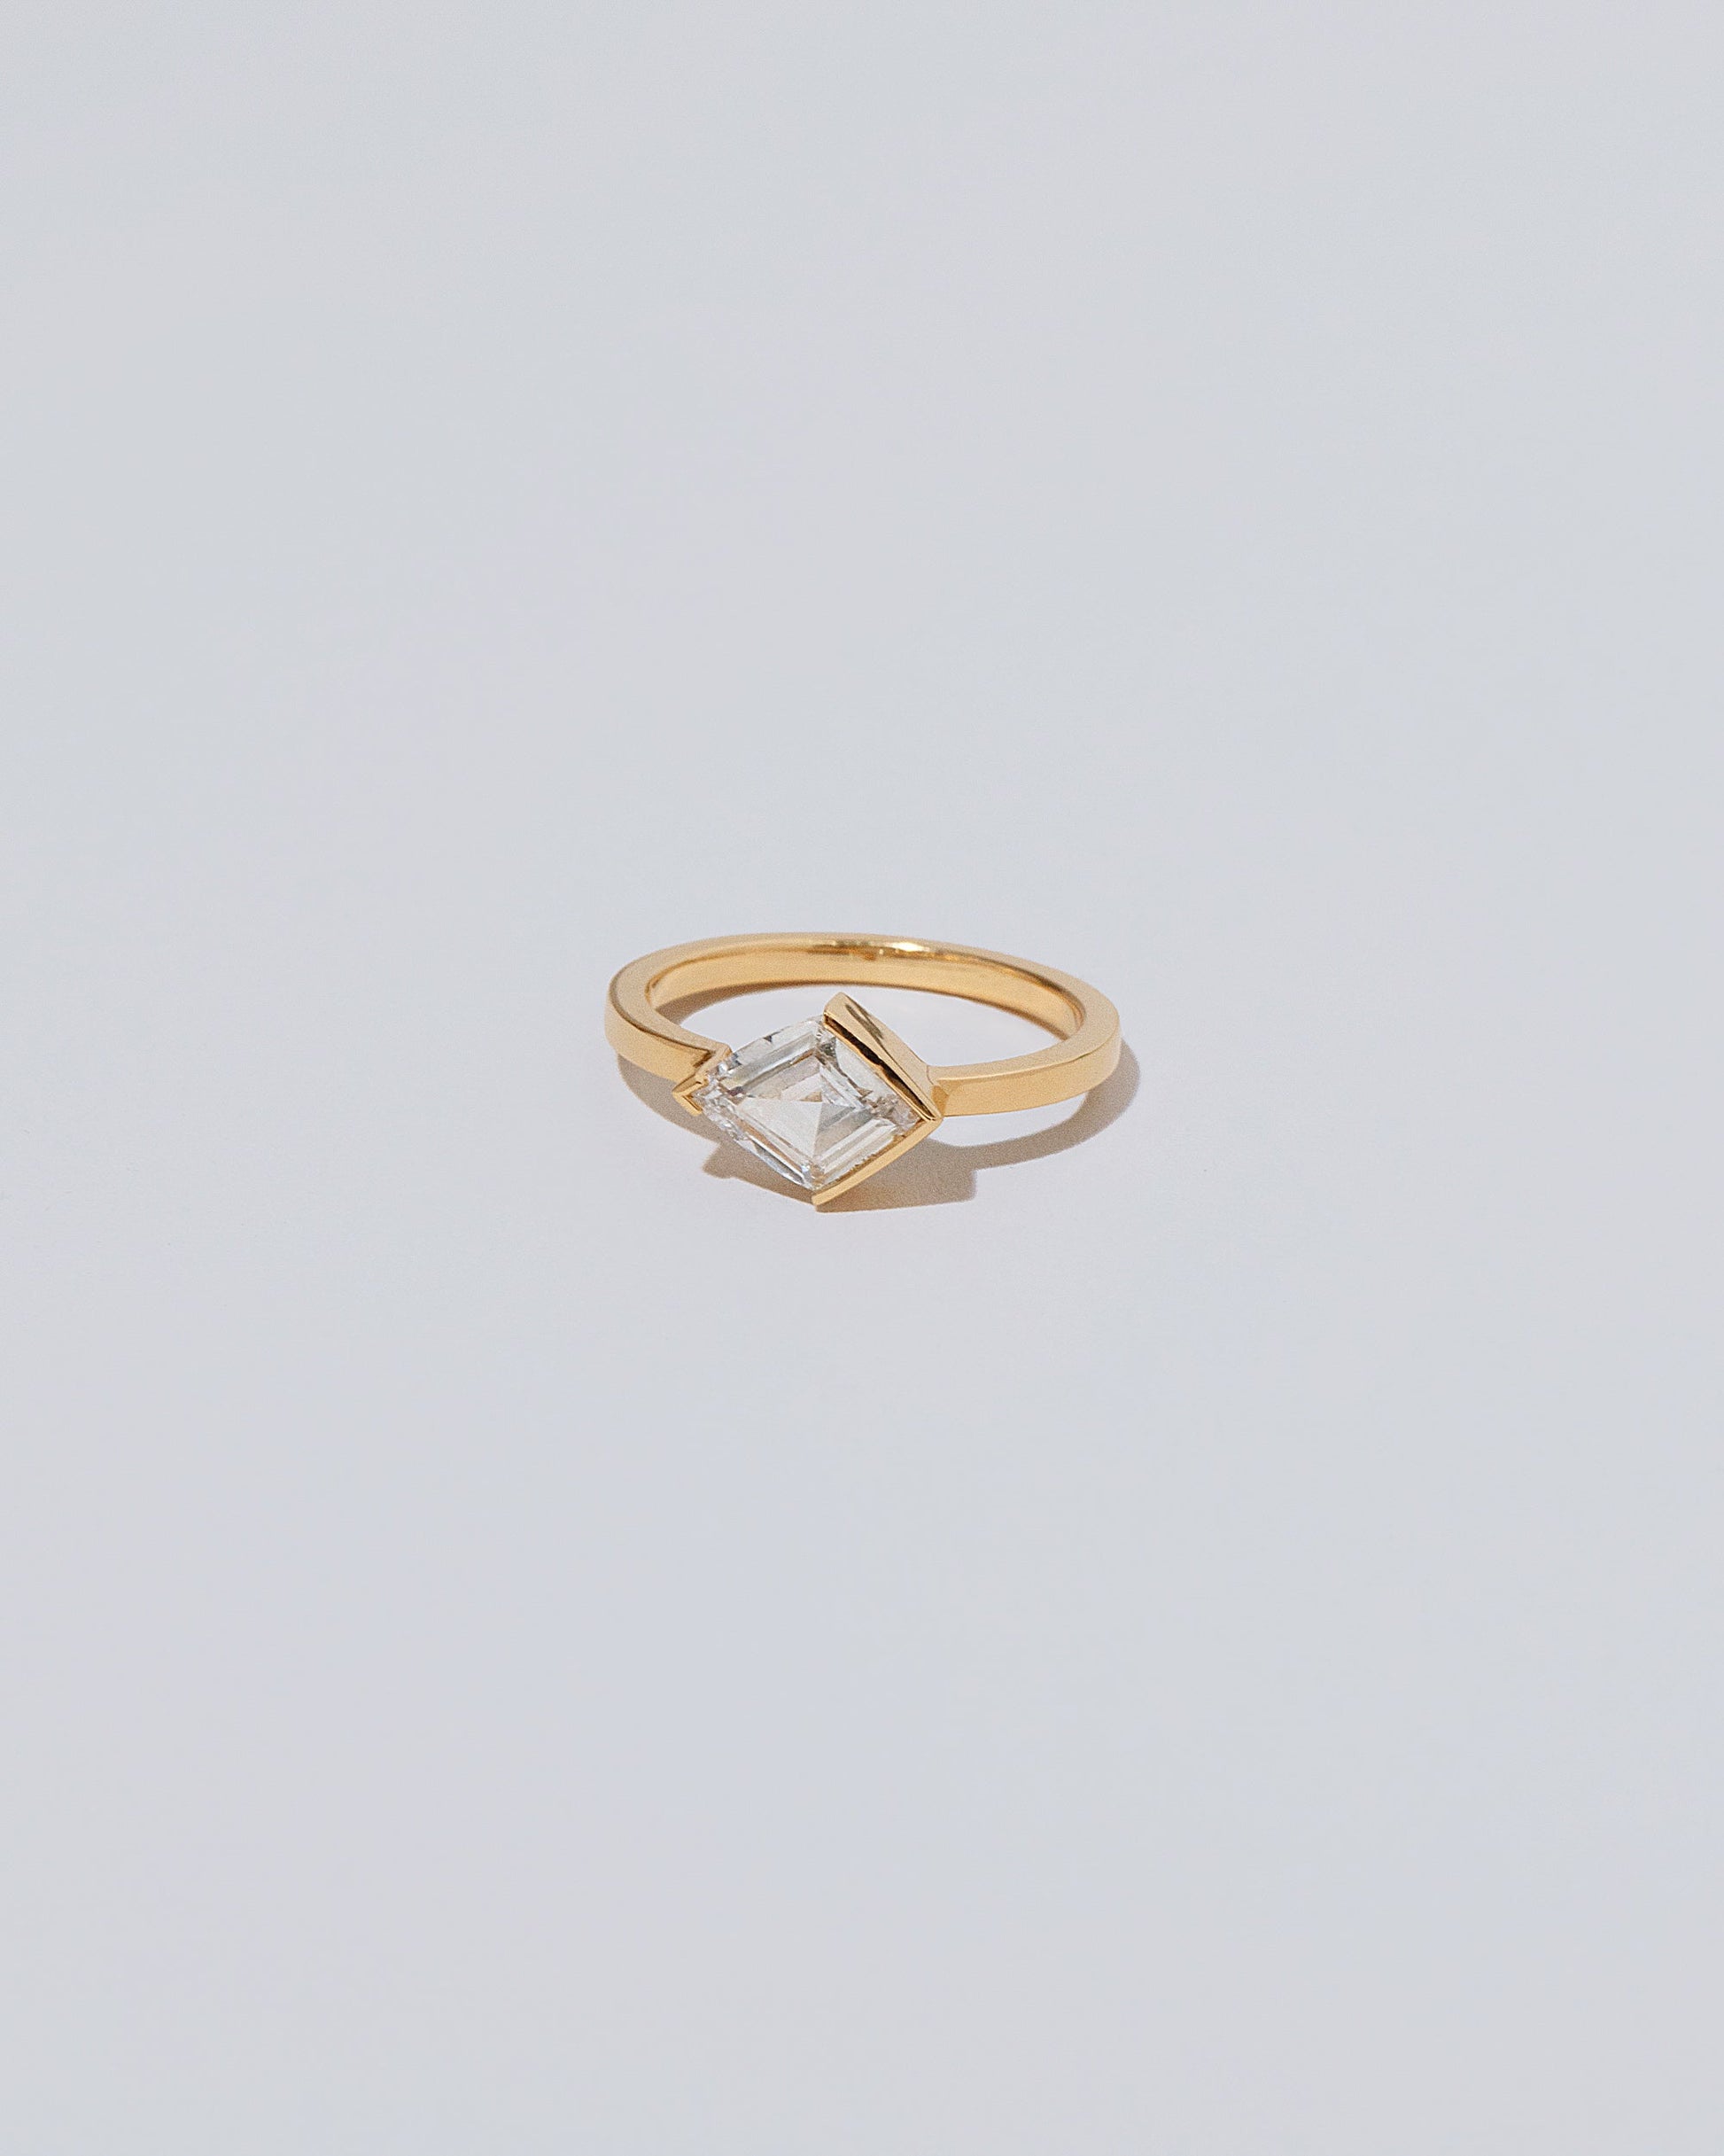 Product photo of the Pirouette Ring on light color background